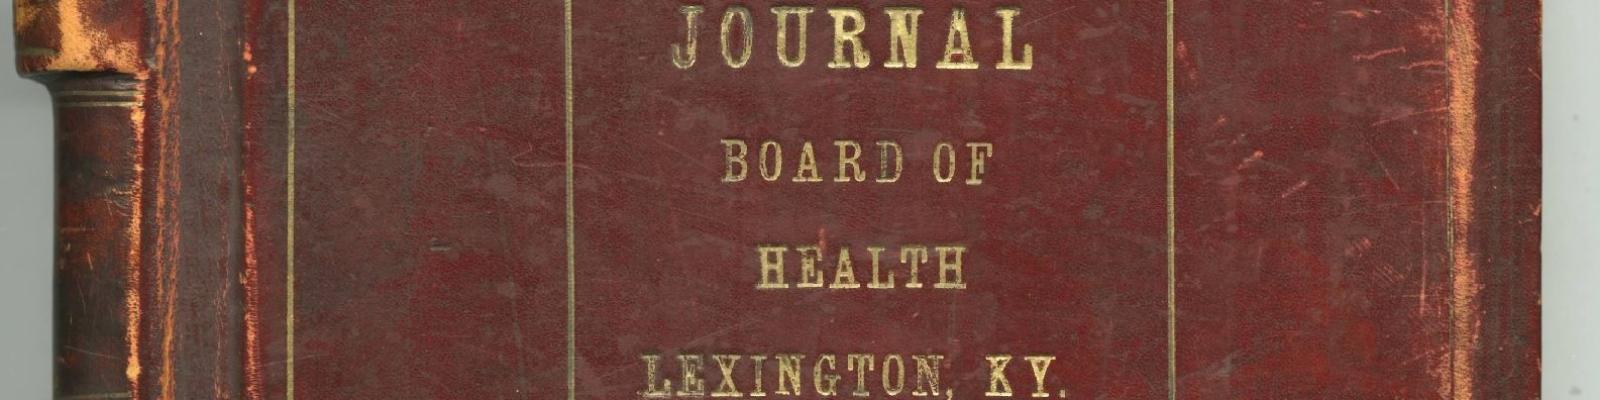 Front cover of the Board of Health board minutes book, 1904-1922